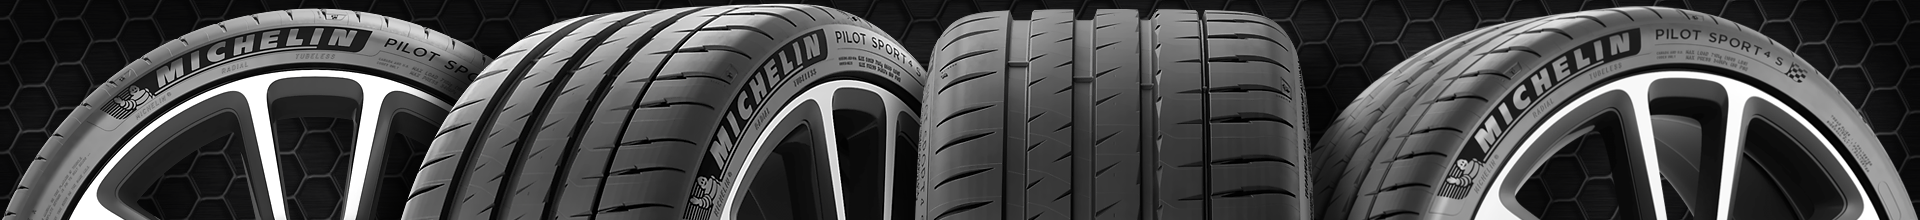 265 40 20 discount tires from Tire Outlet US